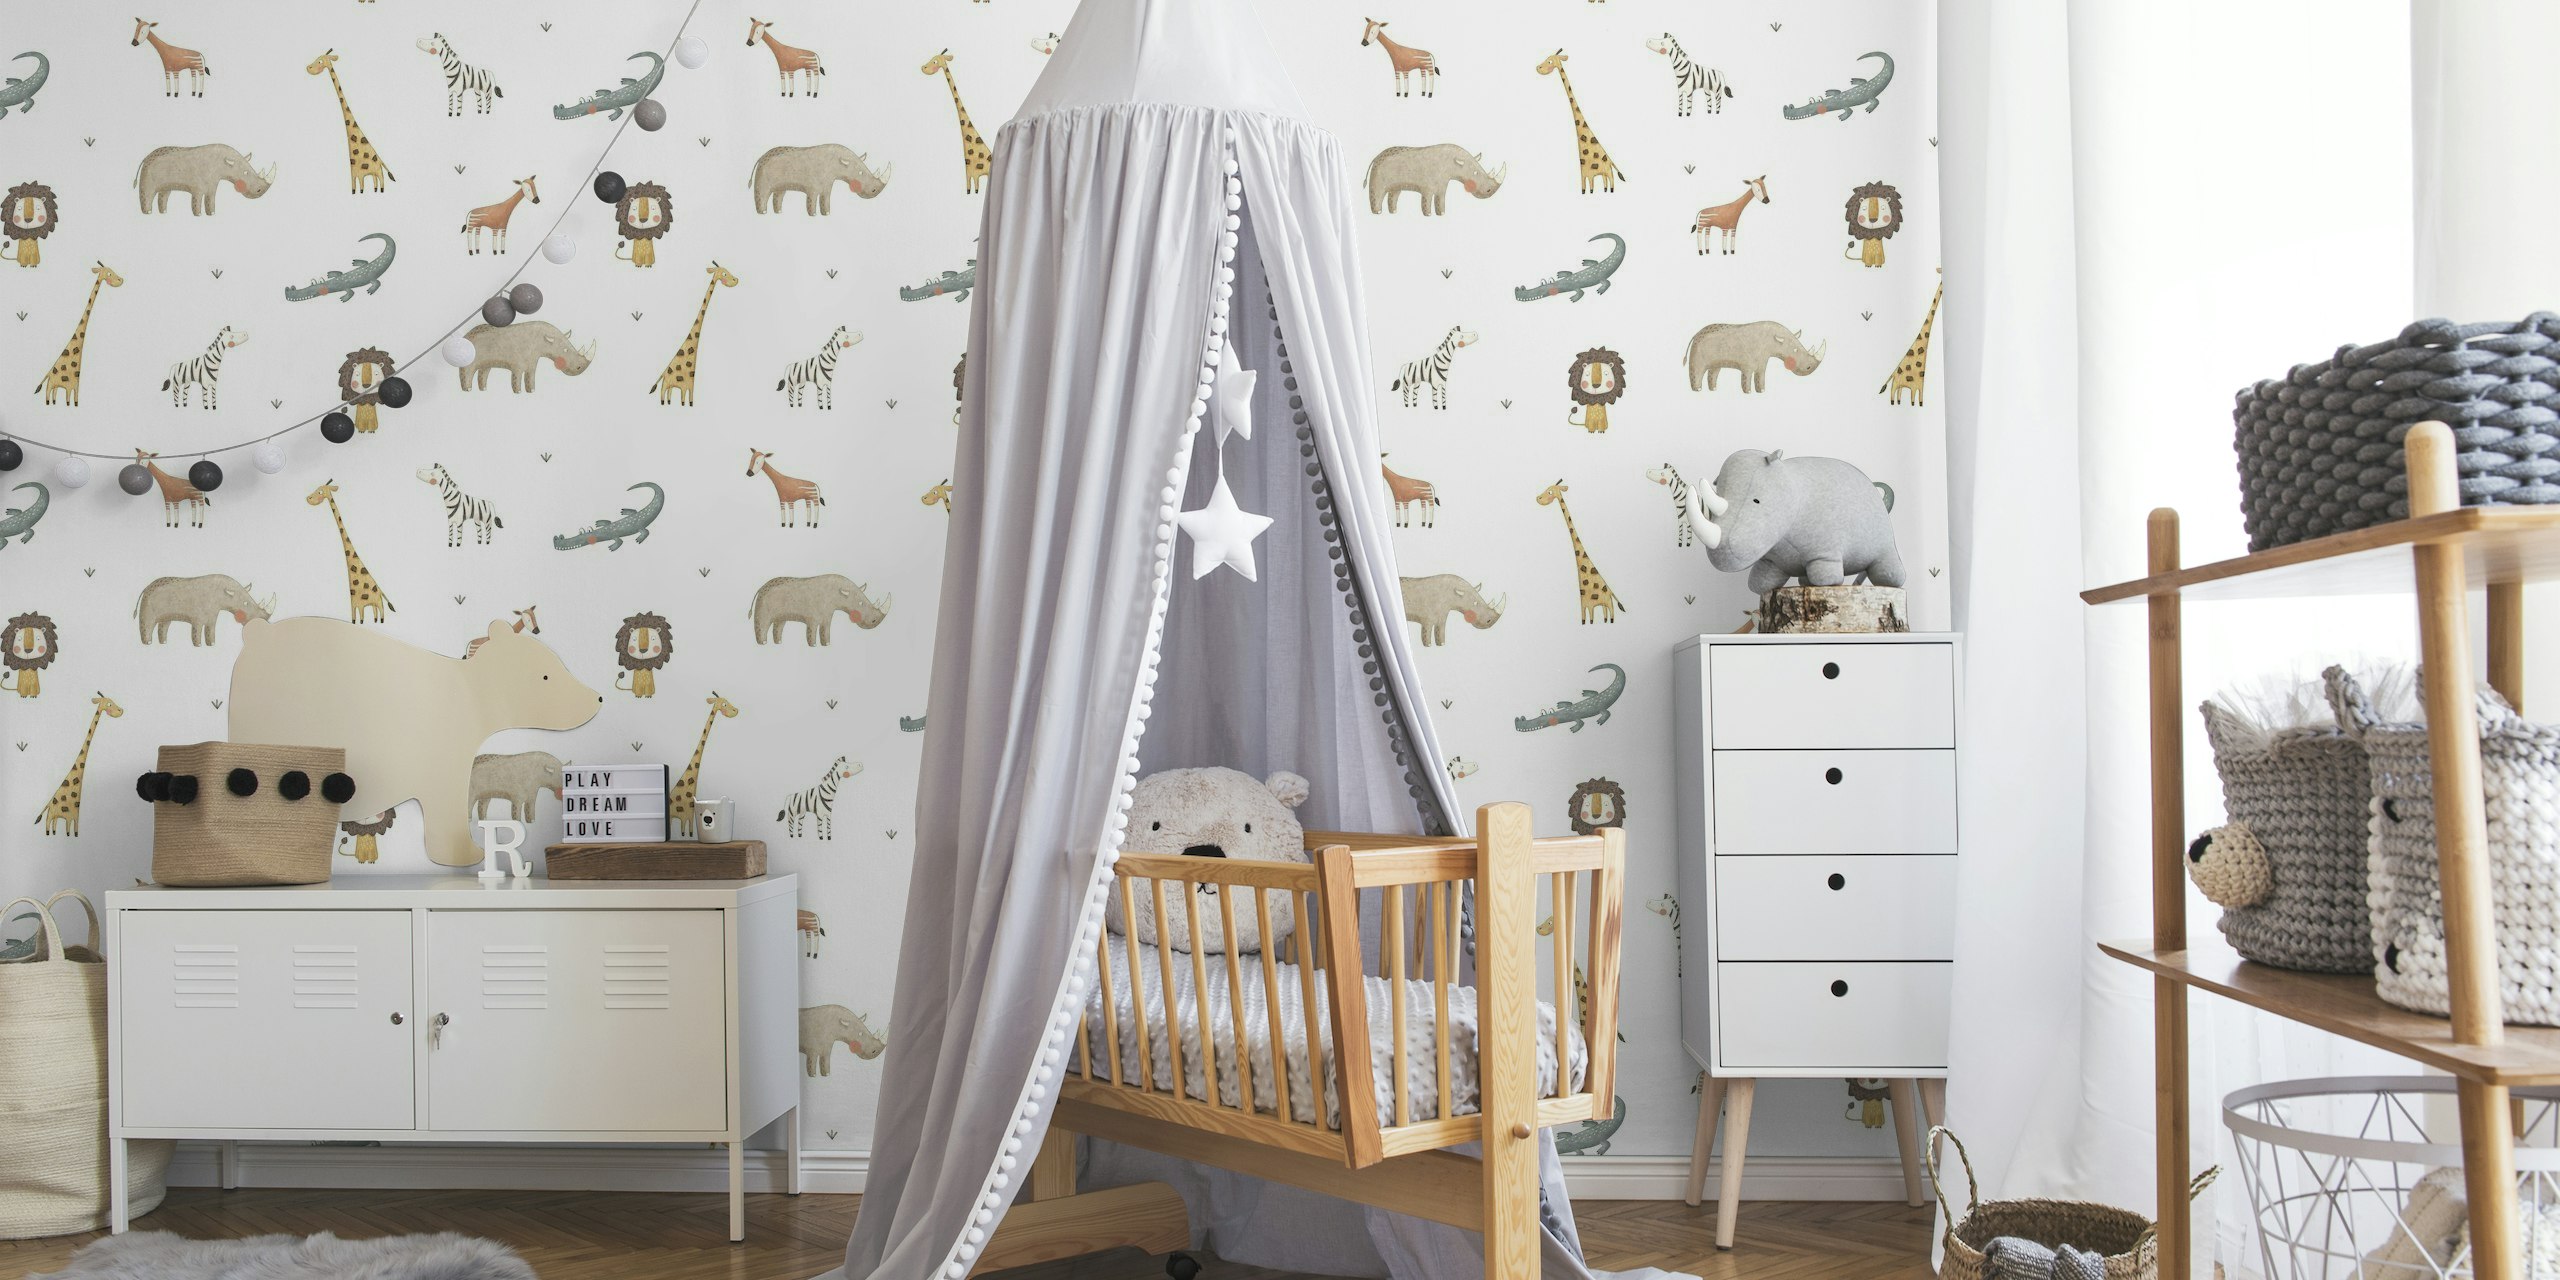 Illustrated safari animals wall mural featuring giraffes, elephants, lions, and zebras